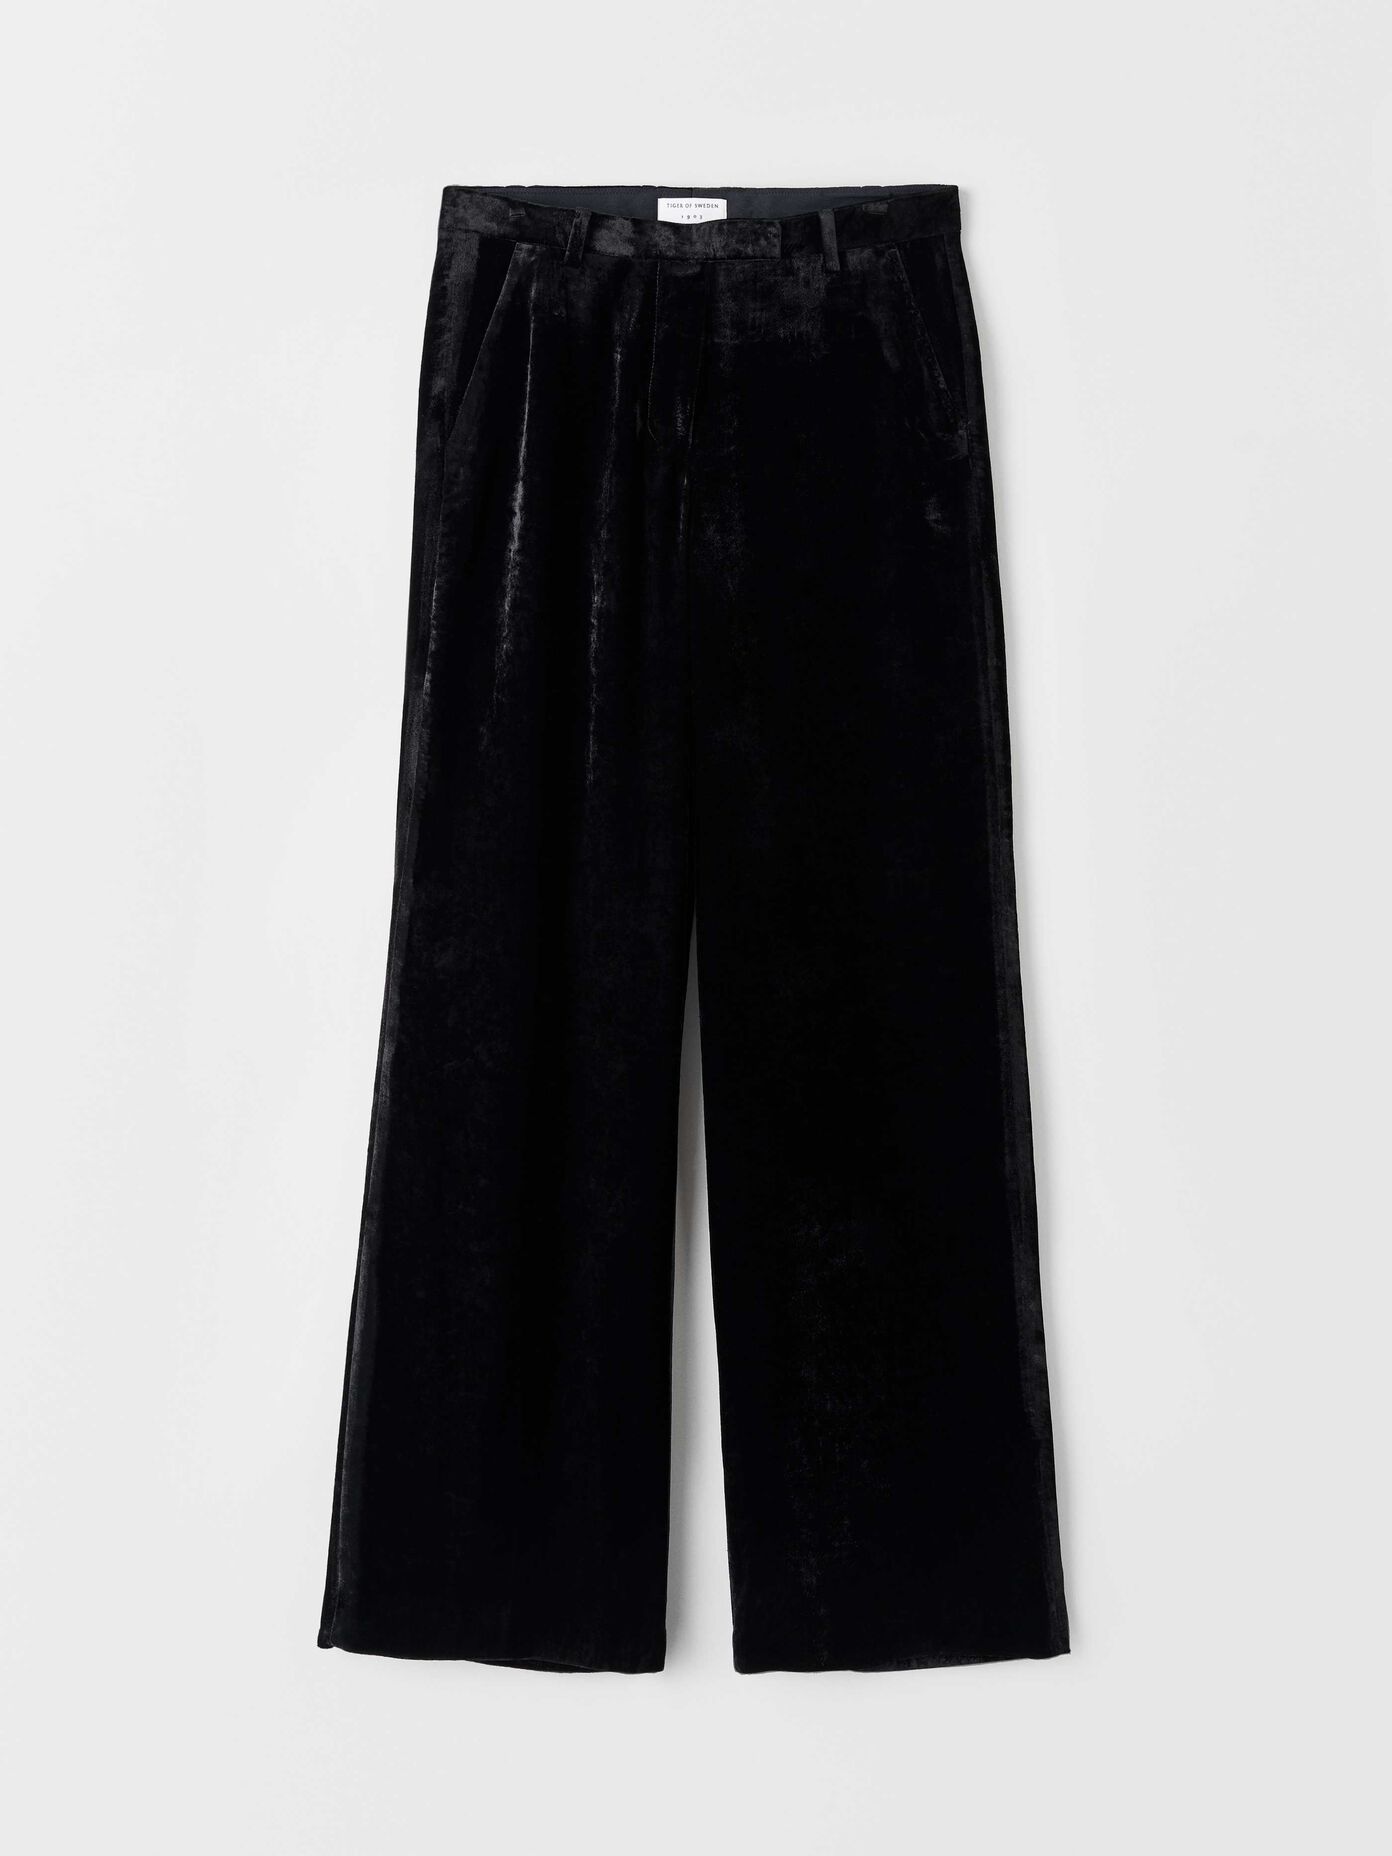 Trousers - Shop Tiger of Sweden's collection of women's trousers online